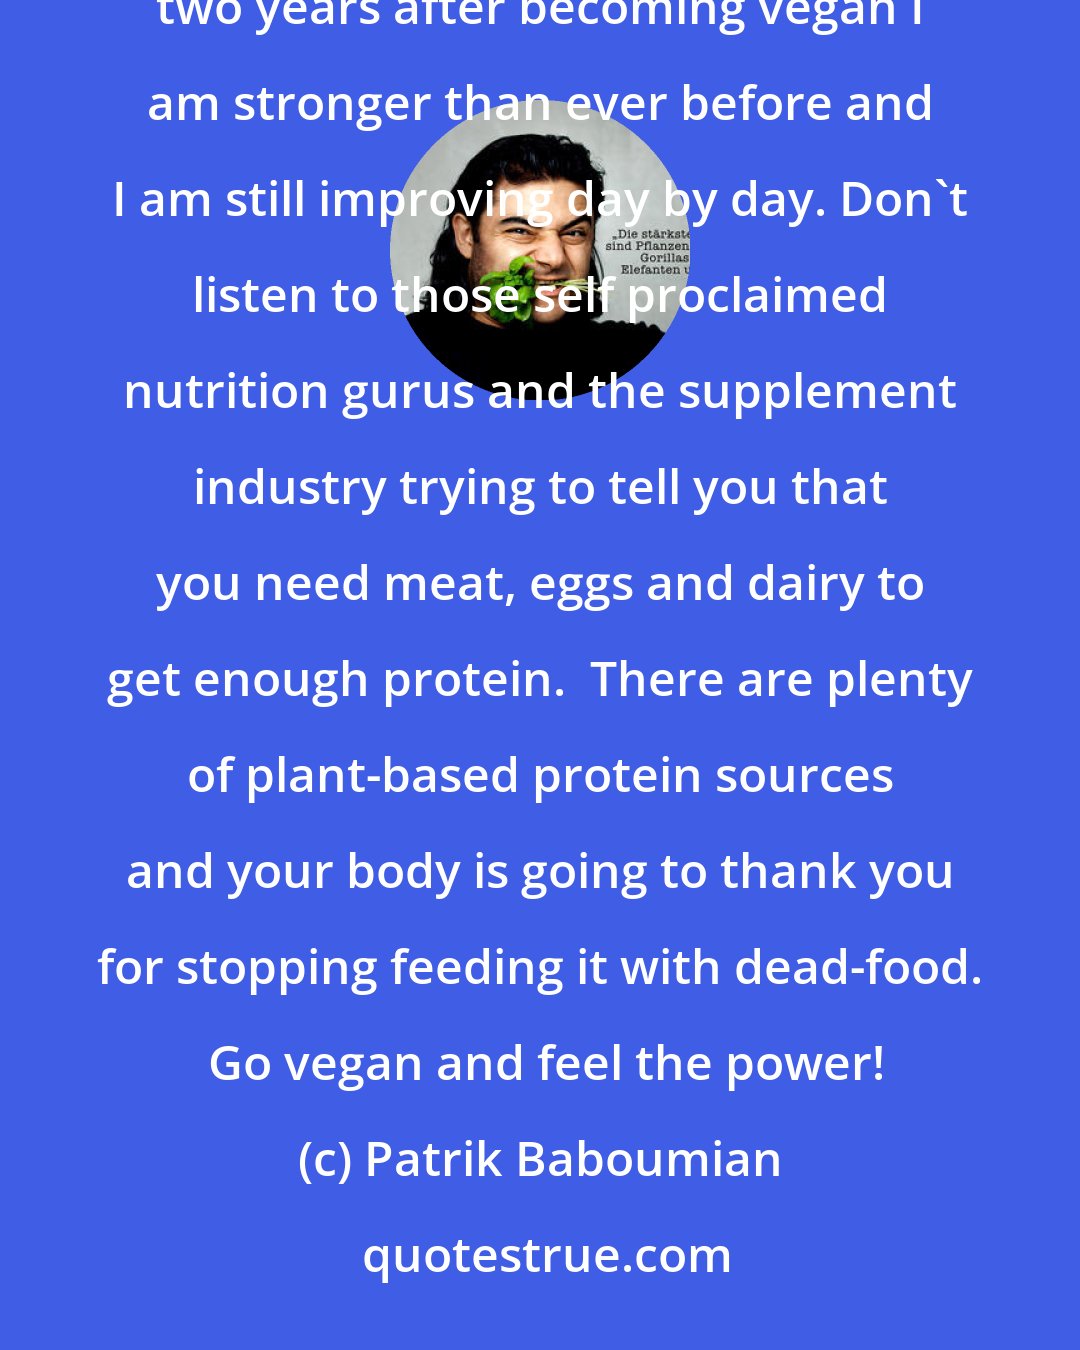 Patrik Baboumian: This is a message to all those out there who think that you need animal products to be fit and strong. Almost two years after becoming vegan I am stronger than ever before and I am still improving day by day. Don't listen to those self proclaimed nutrition gurus and the supplement industry trying to tell you that you need meat, eggs and dairy to get enough protein.  There are plenty of plant-based protein sources and your body is going to thank you for stopping feeding it with dead-food.  Go vegan and feel the power!